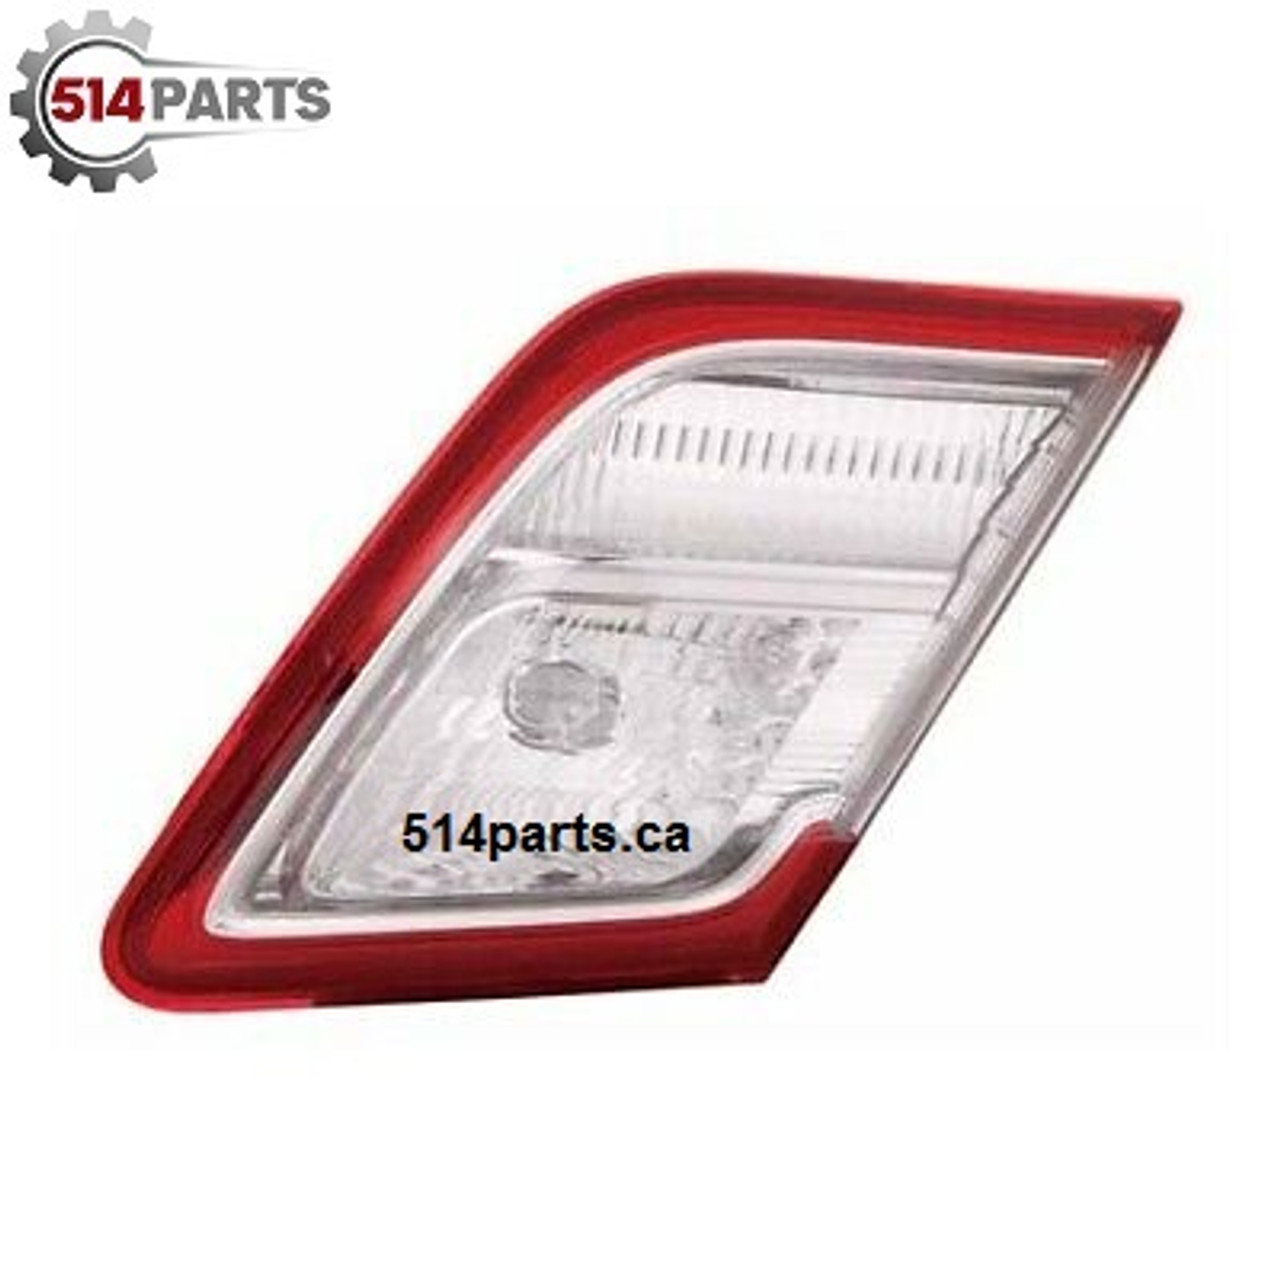 2010 - 2011 TOYOTA CAMRY HYBRID USA BUILT MODELS Inner TAIL LIGHTS(BACK-UP LAMP) High Quality - PHARES ARRIERE Interne(LAMPE DE RECUL) Haute Qualite